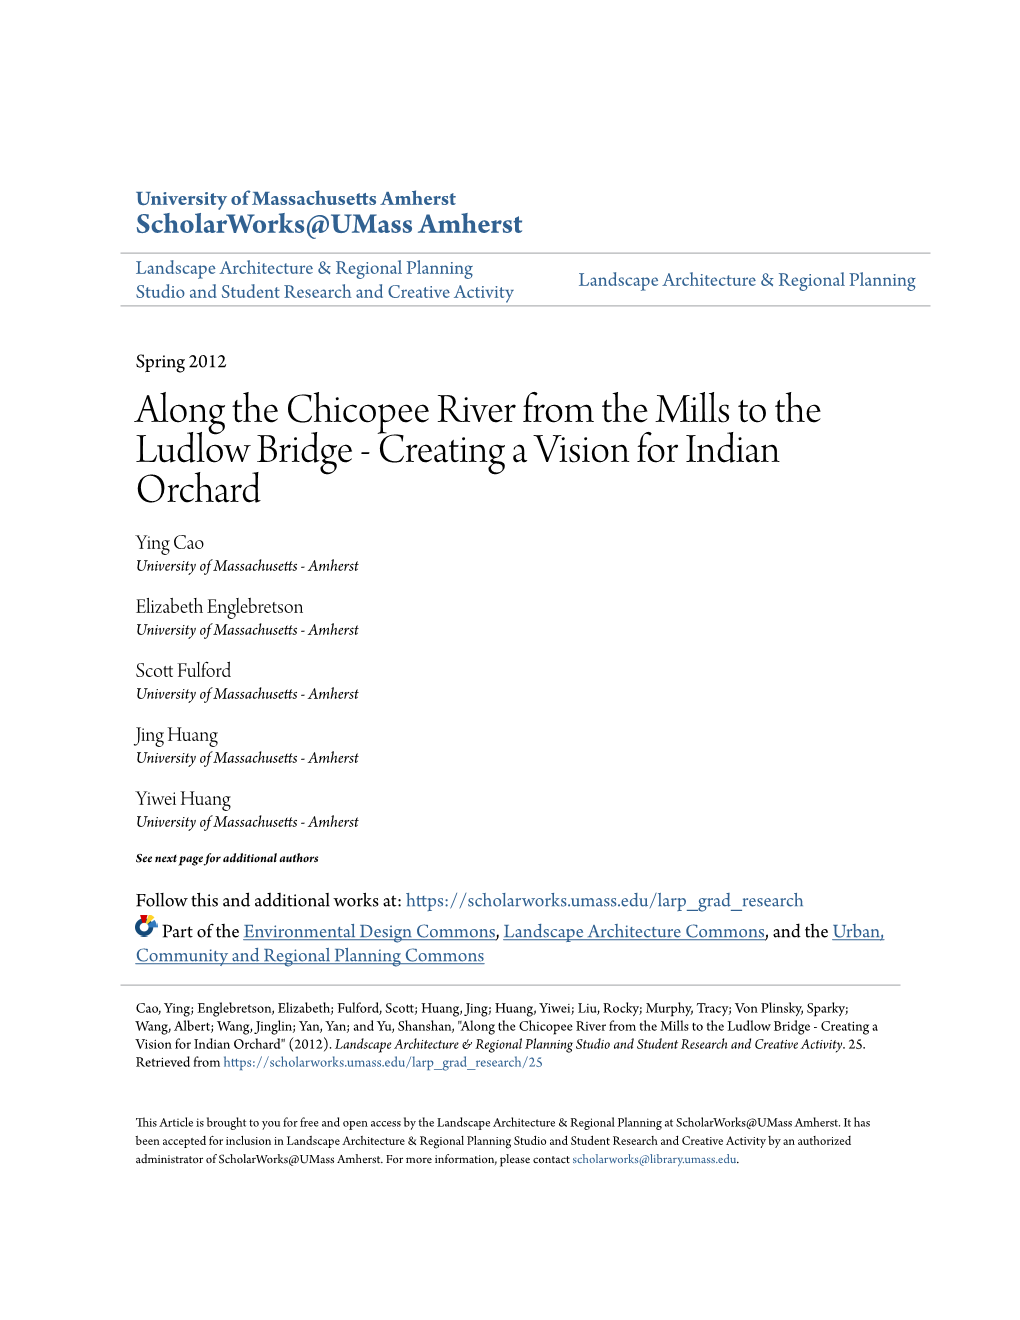 Along the Chicopee River from the Mills to the Ludlow Bridge - Creating a Vision for Indian Orchard Ying Cao University of Massachusetts - Amherst